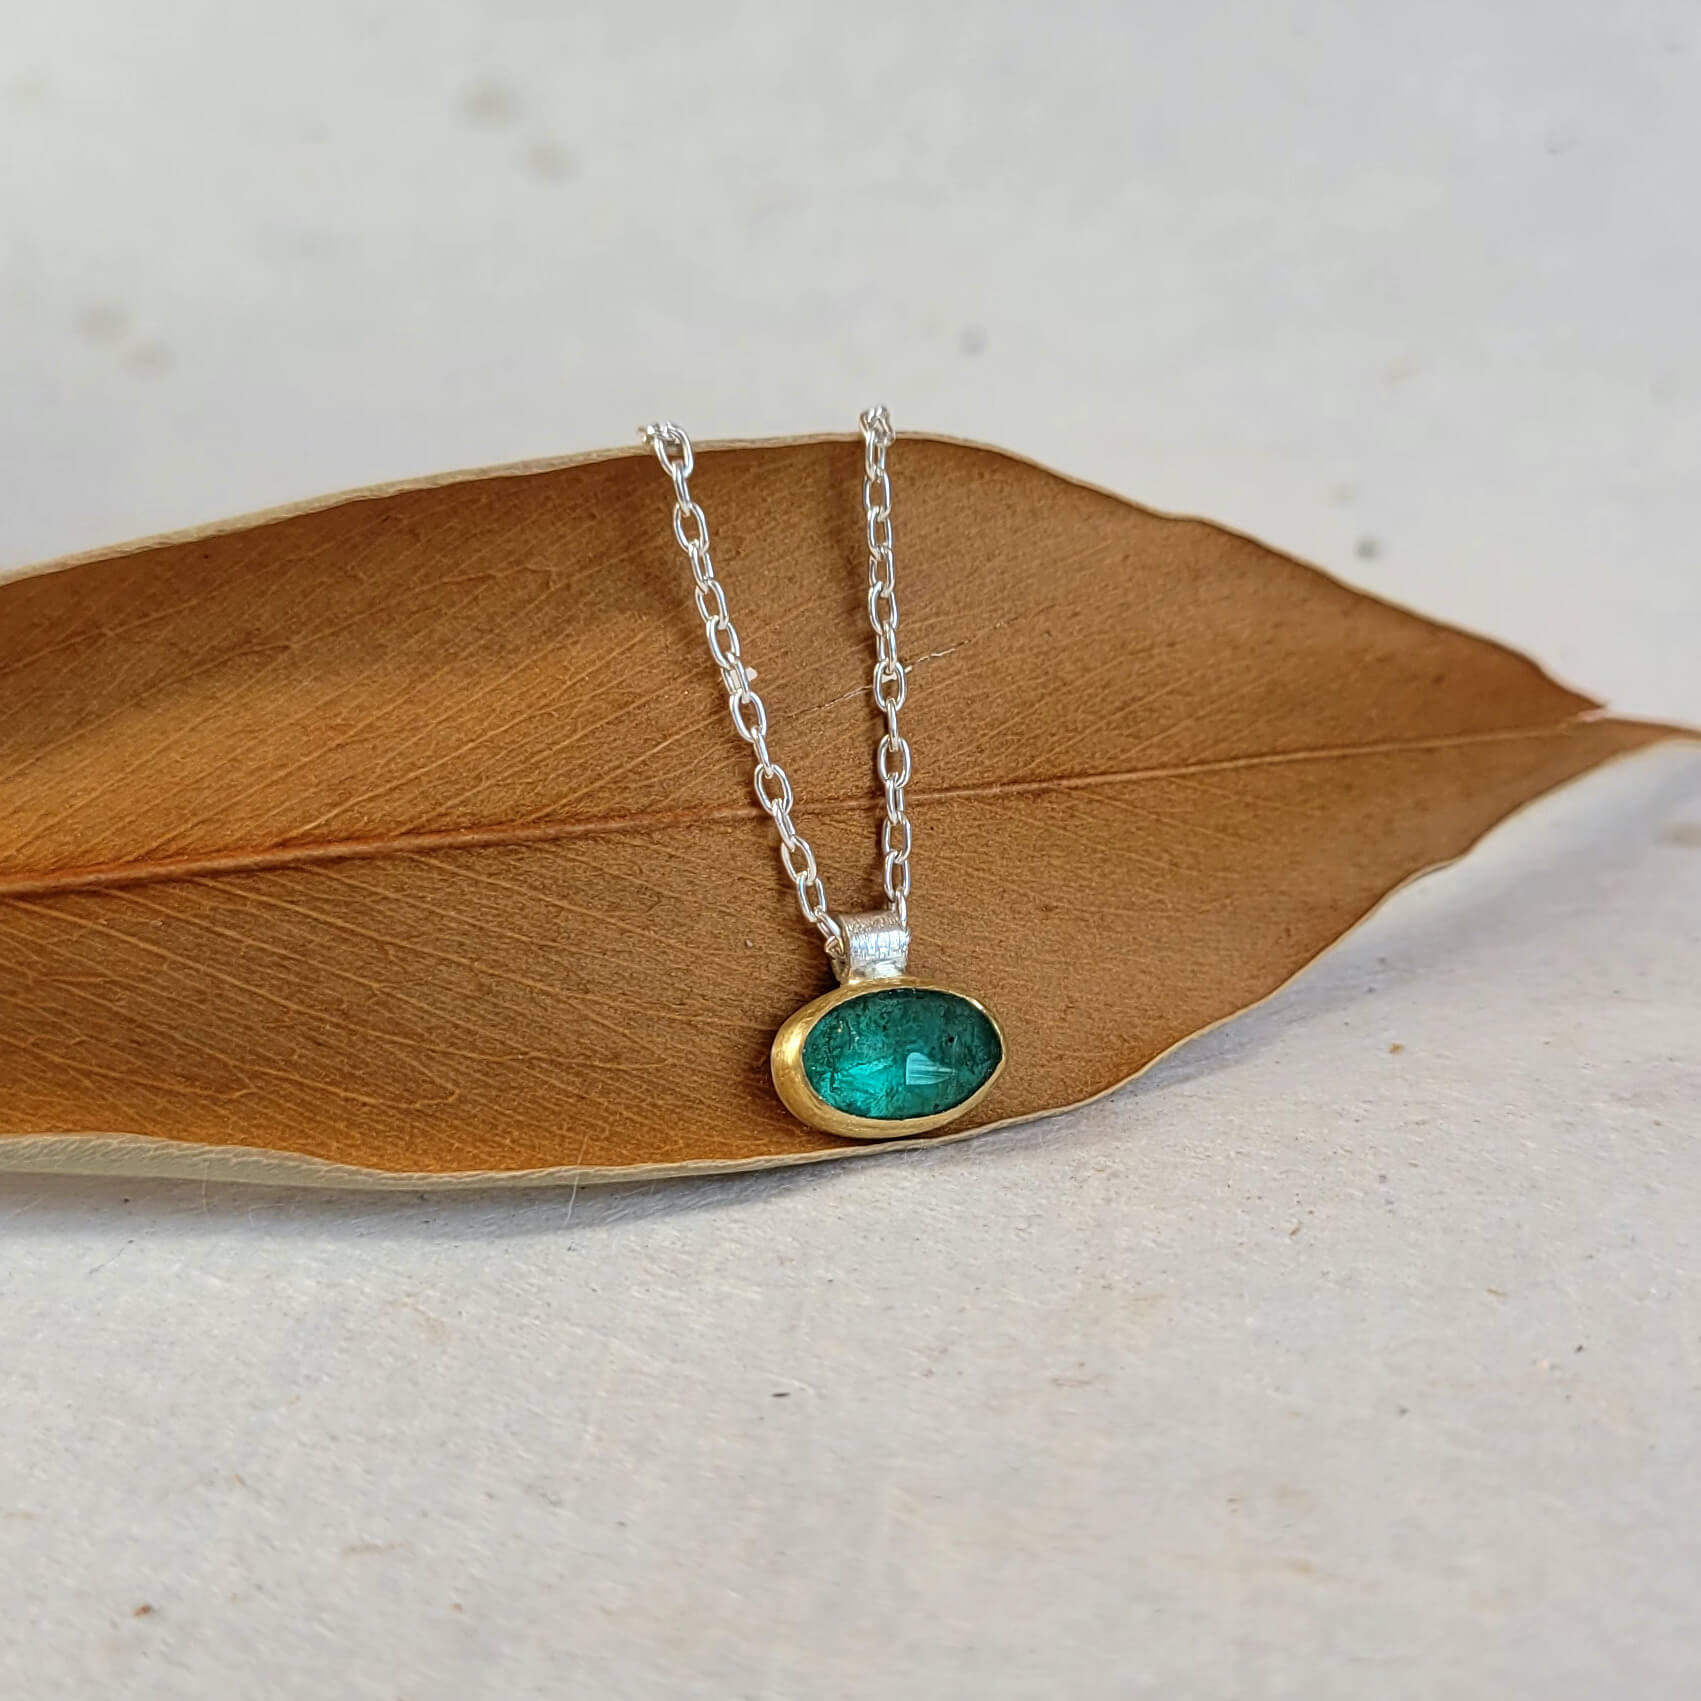 Emerald necklace with yellow gold bezel. Handmade by EC Design Jewelry in Minneapolis, MN.